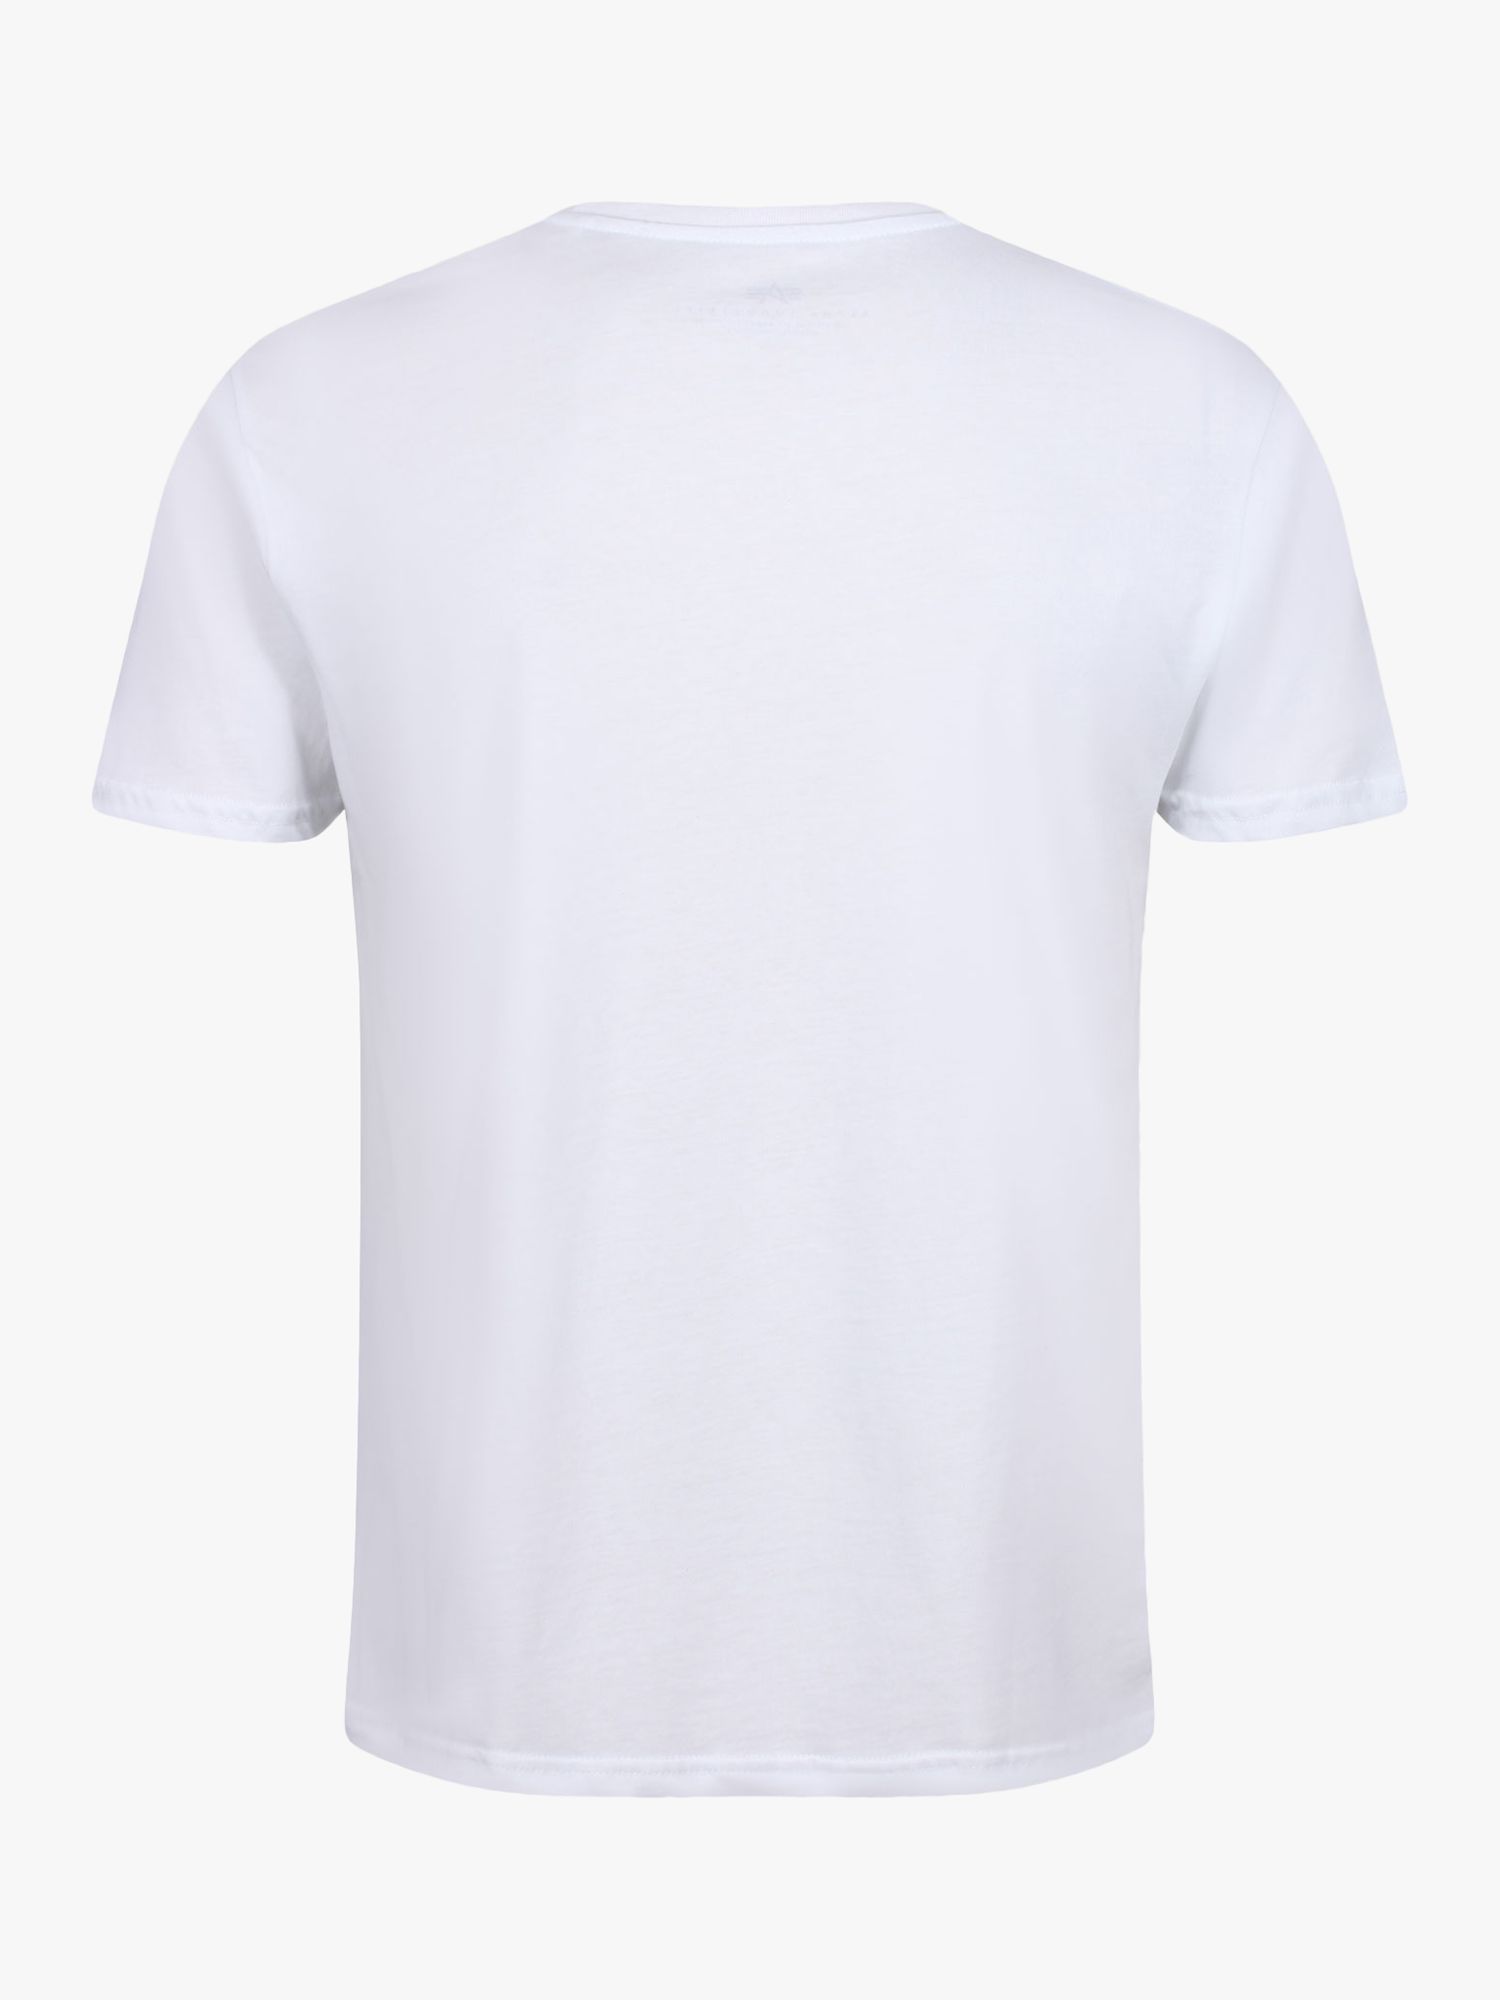 Buy Alpha Industries Crew T-Shirt, Pack of 2 Online at johnlewis.com